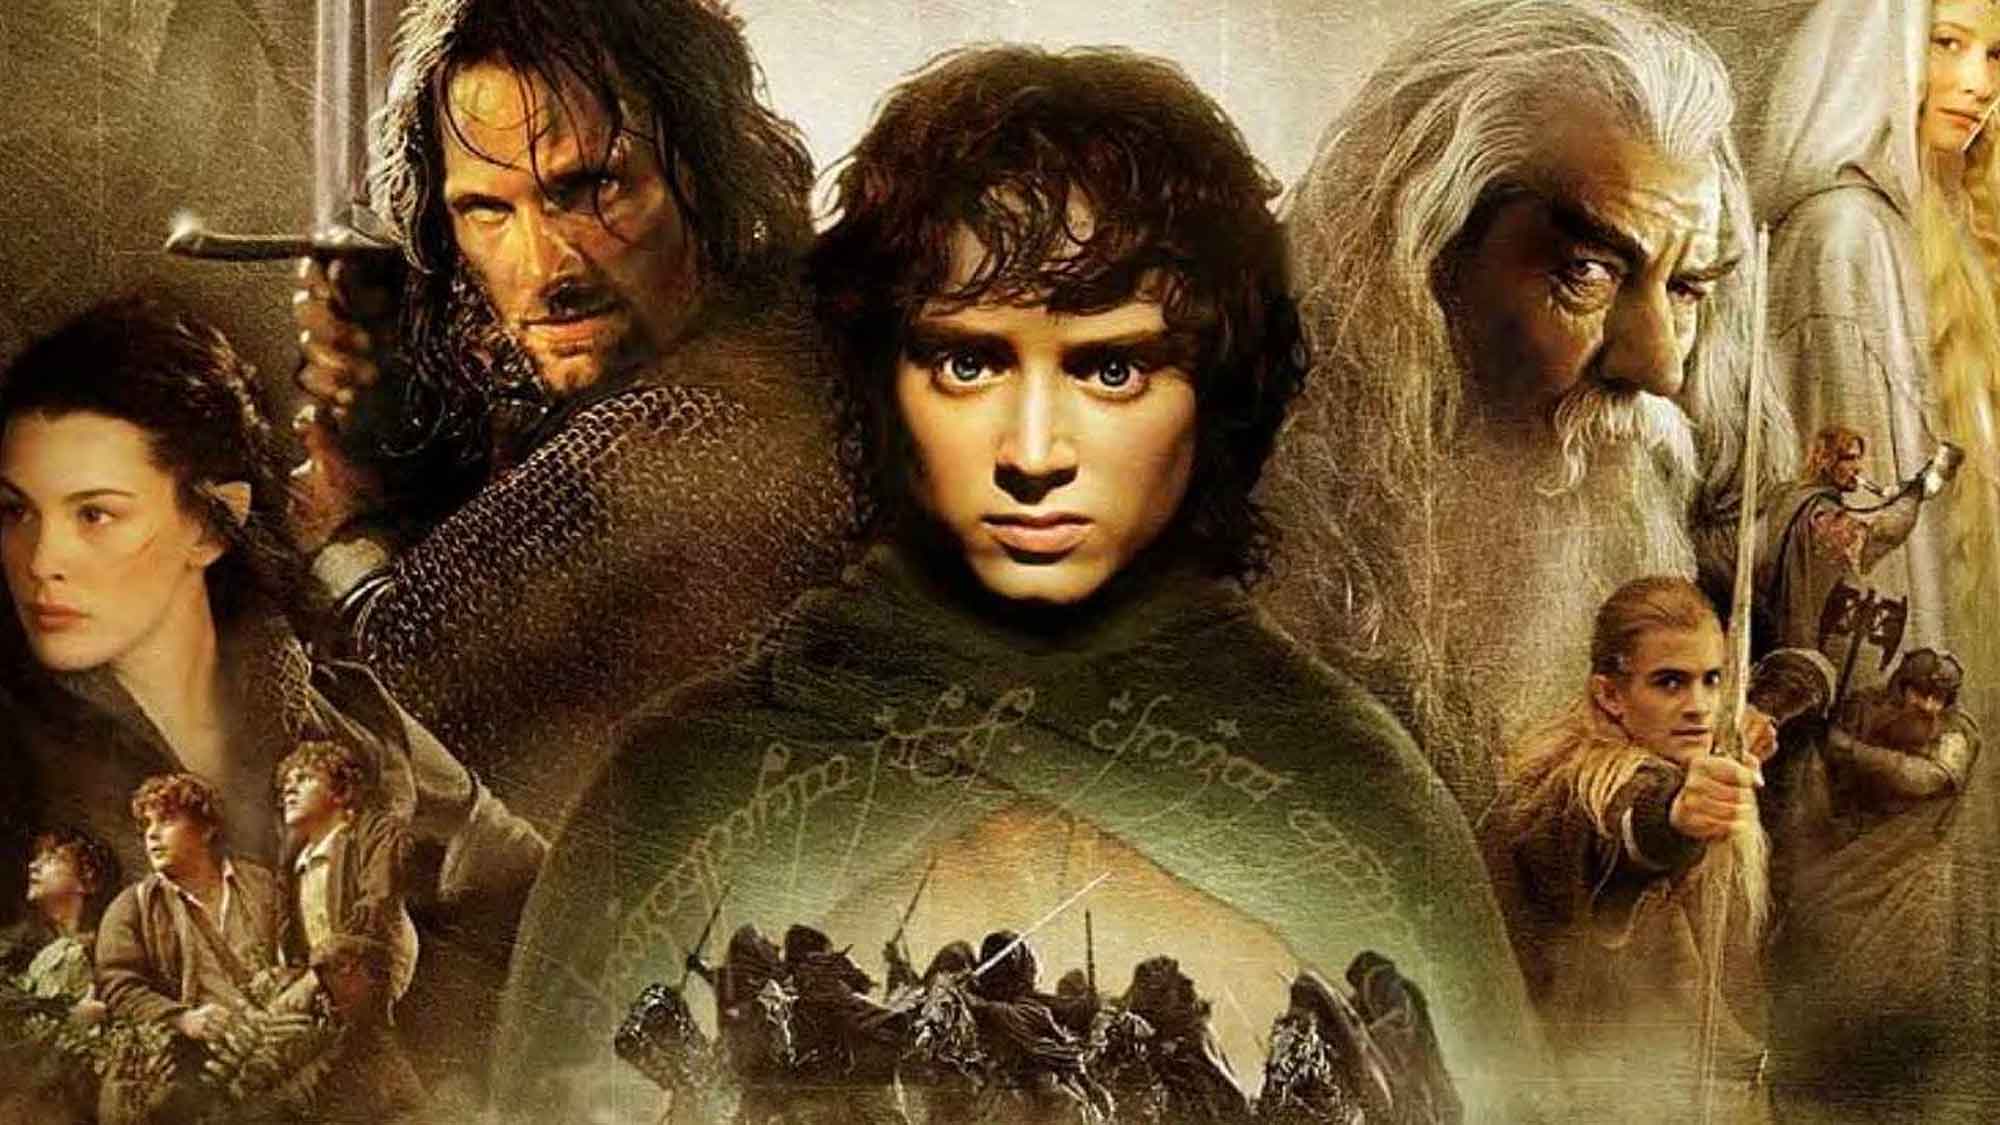 11 Of The Most Memorable Lord of the Rings Quotes